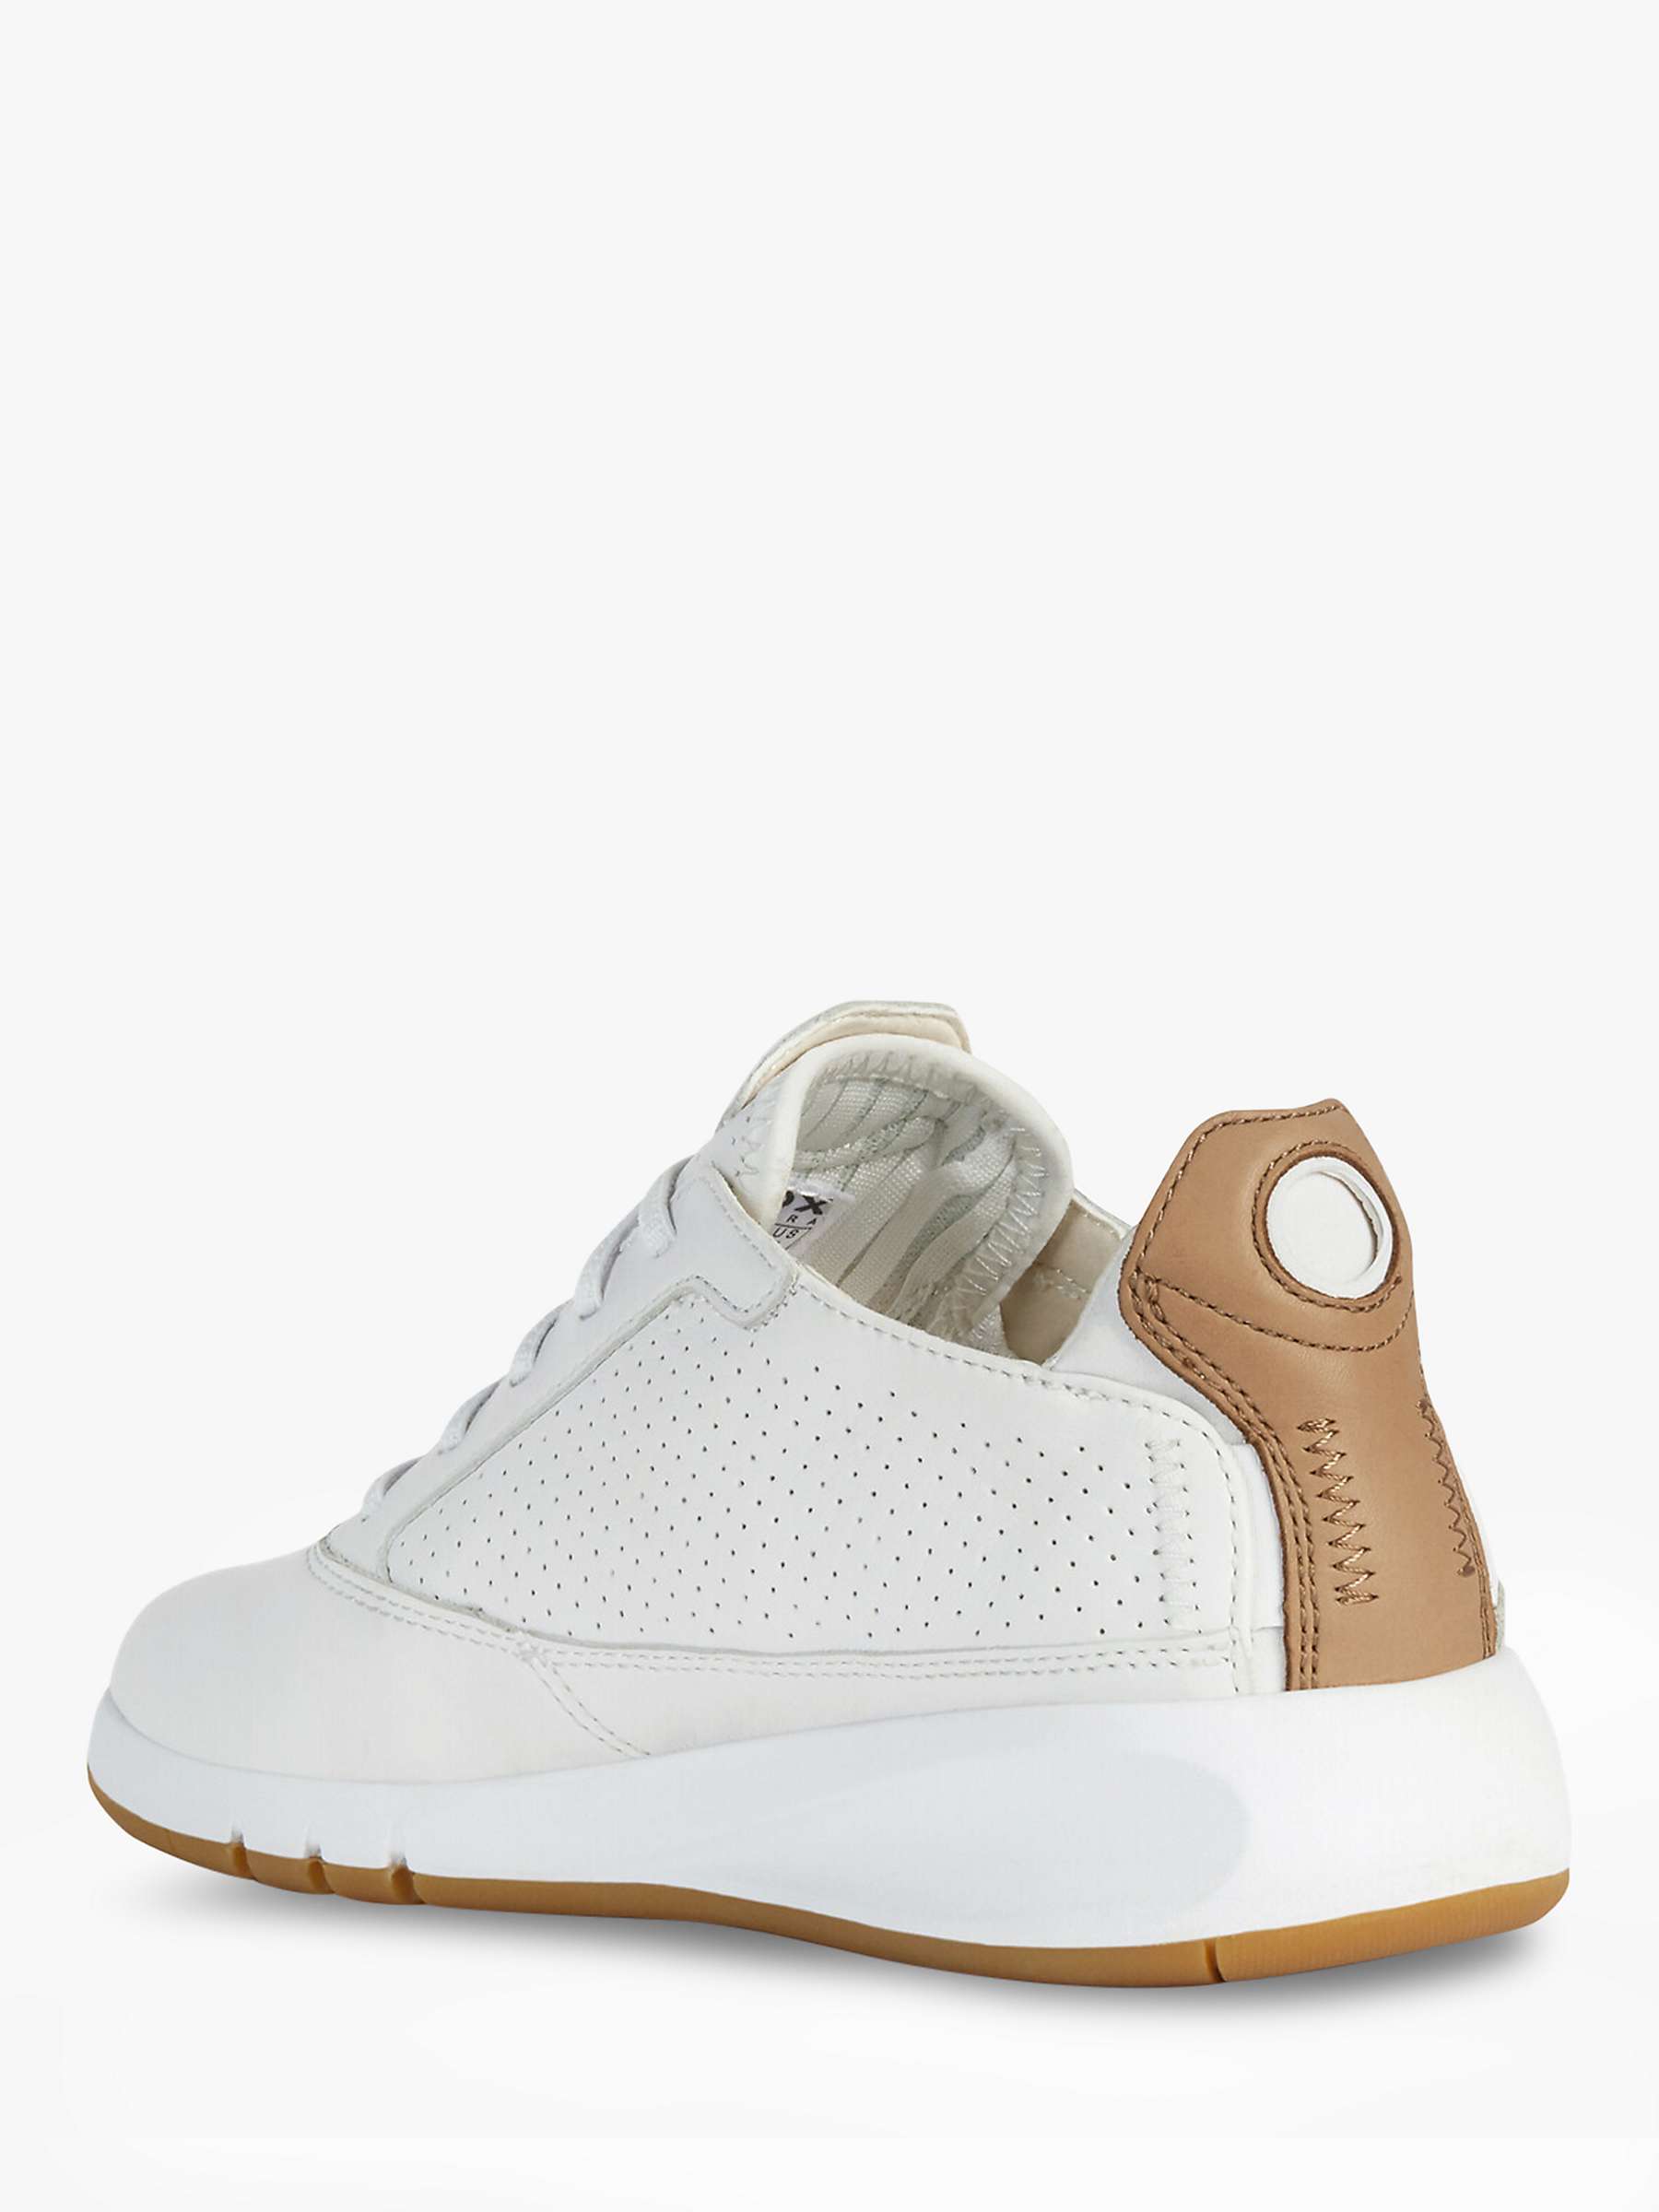 Buy Geox Aerantis Leather Trainers, White Online at johnlewis.com